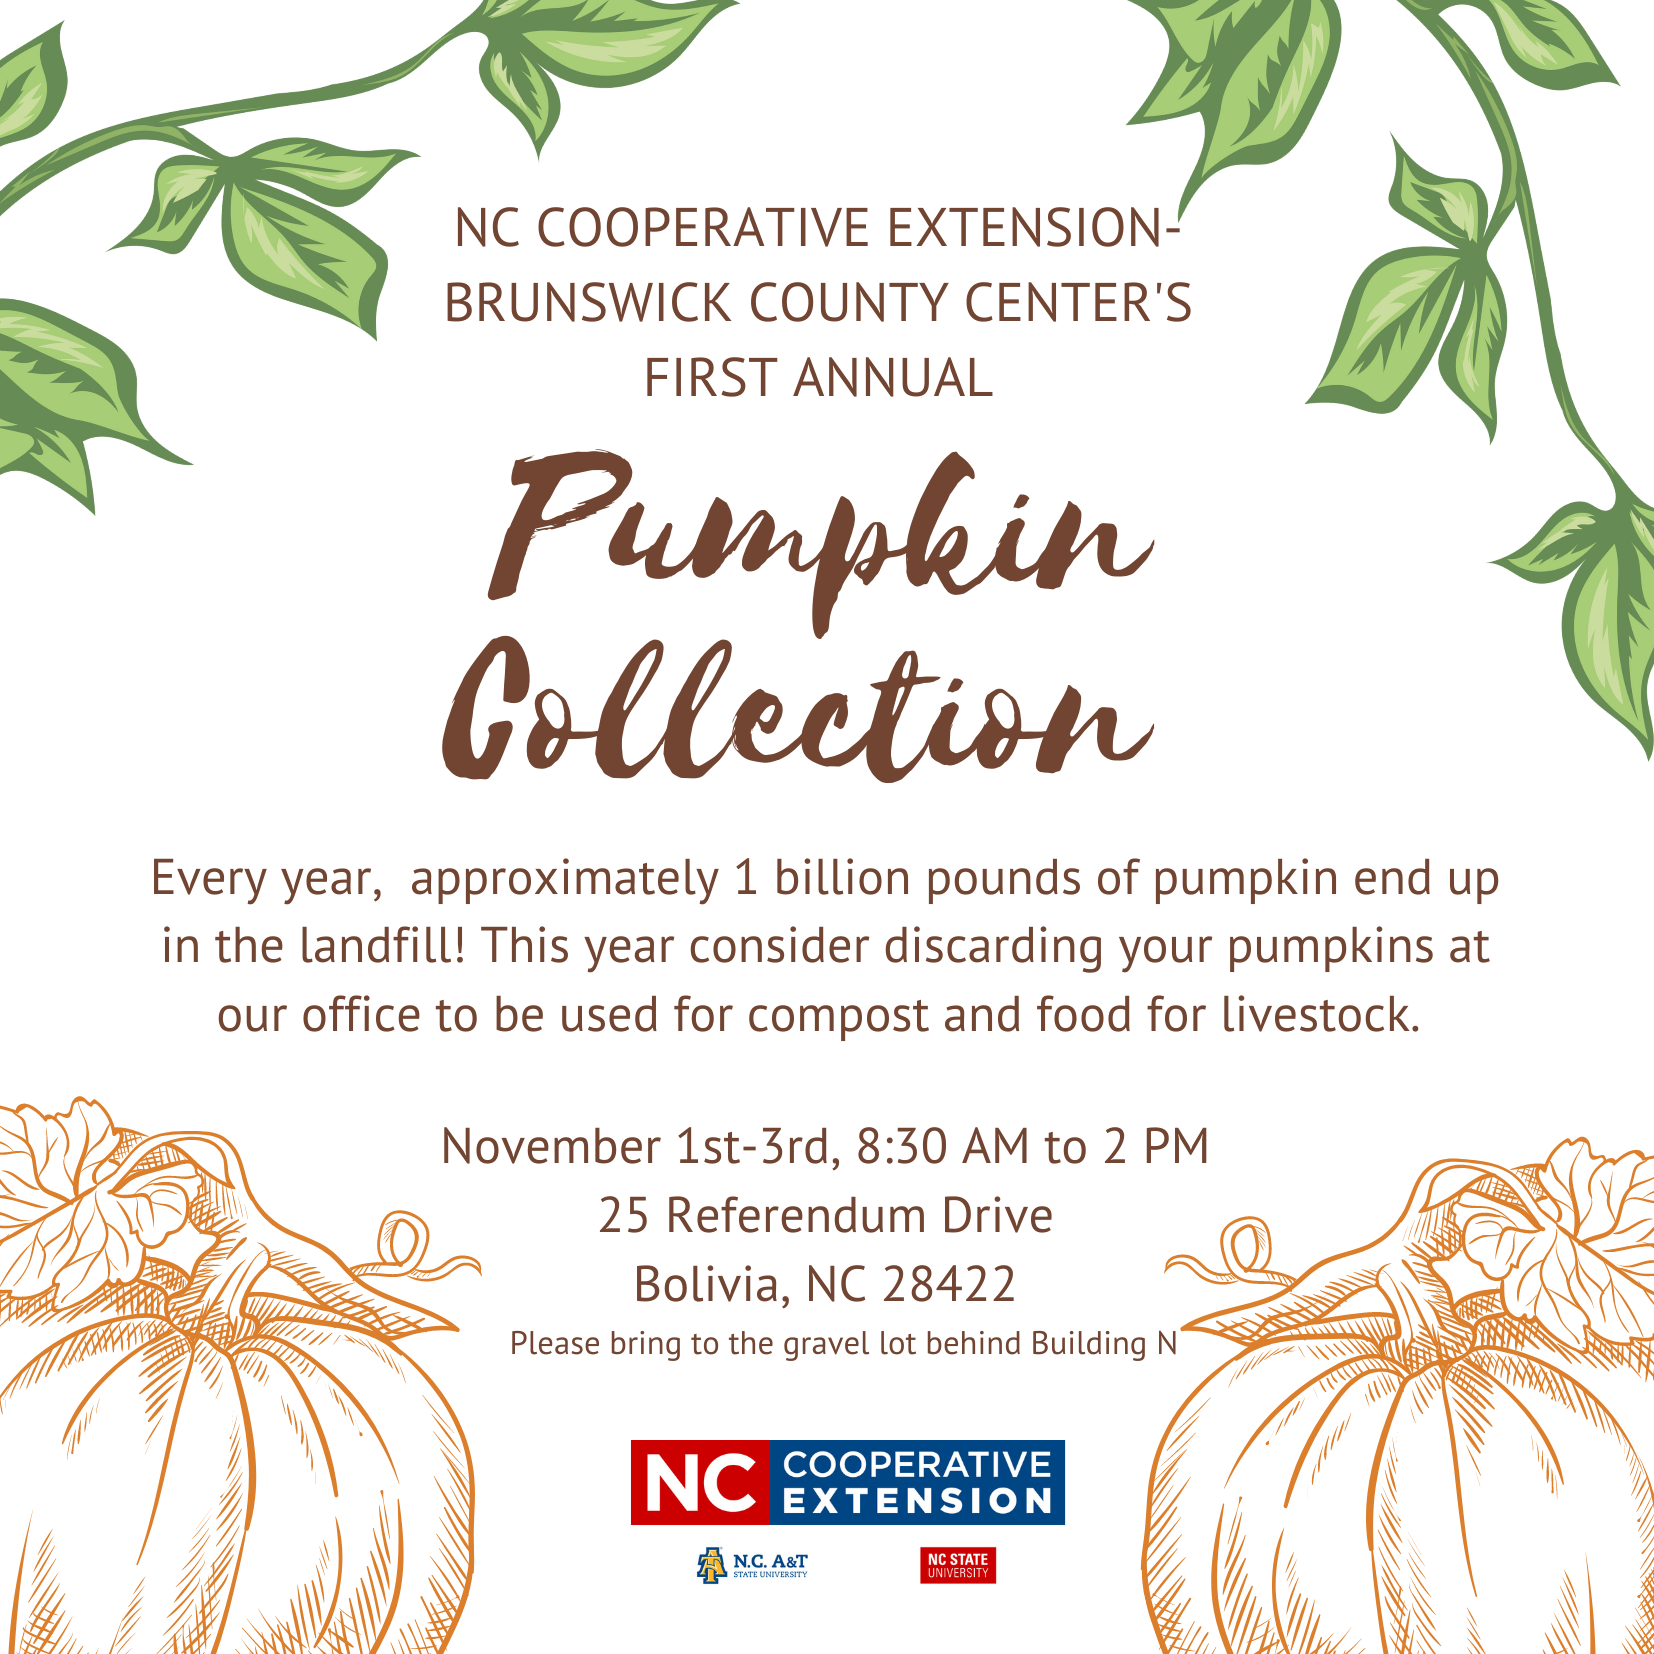 N.C. Cooperative Extension- Brunswick County Center's First Annual Pumpkin Collection. Every year, approximately 1 billion pounds of pumpkin end up in the landfill! This year consider discarding your pumpkins at our office to be used for compost and food for livestock. November 1st-3rd, 8:30 a.m. to 2 p.m. 25 Referendum Drive Bolivia, NC 28422